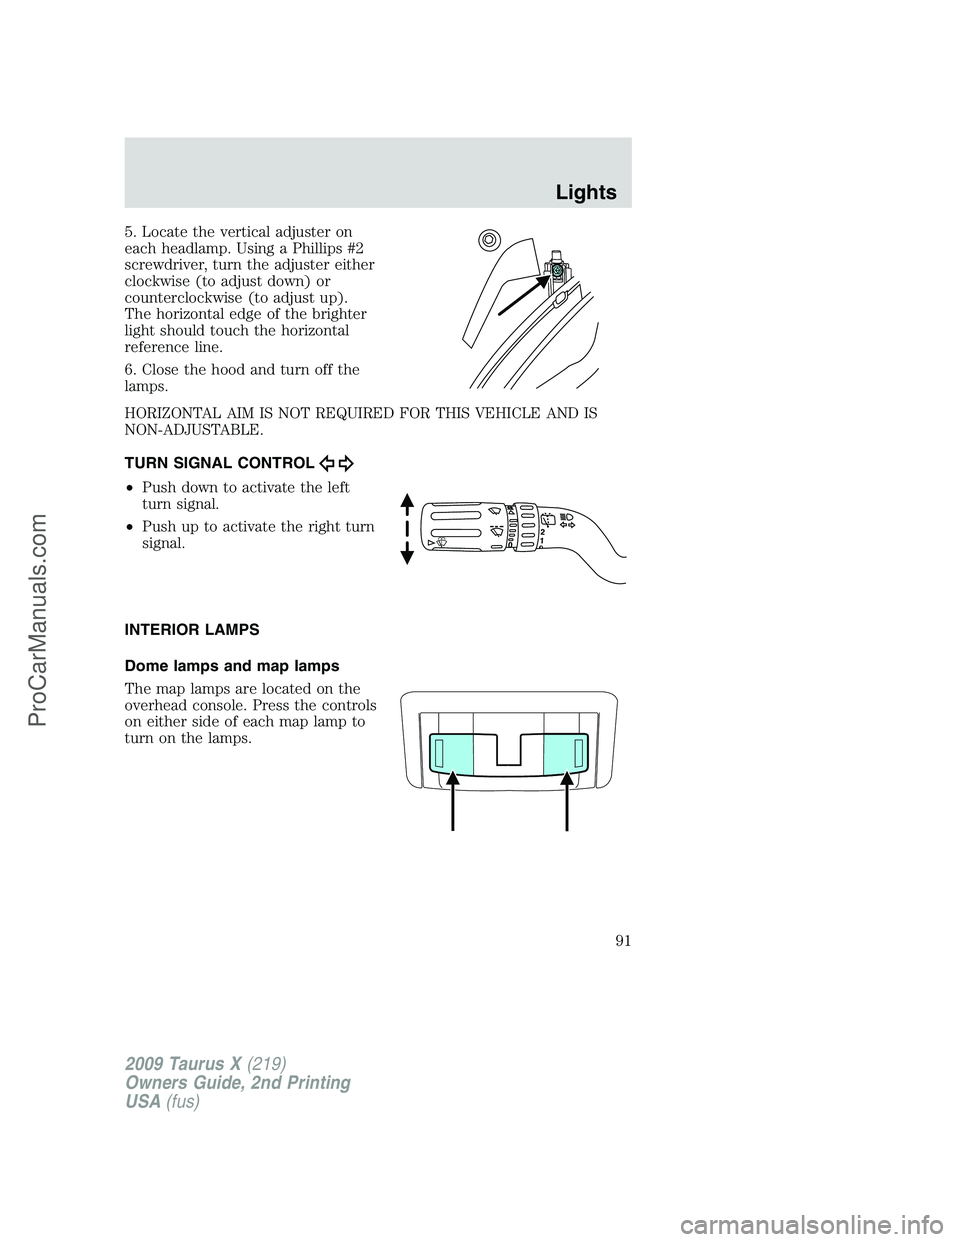 FORD FREESTYLE 2009  Owners Manual 5. Locate the vertical adjuster on
each headlamp. Using a Phillips #2
screwdriver, turn the adjuster either
clockwise (to adjust down) or
counterclockwise (to adjust up).
The horizontal edge of the br